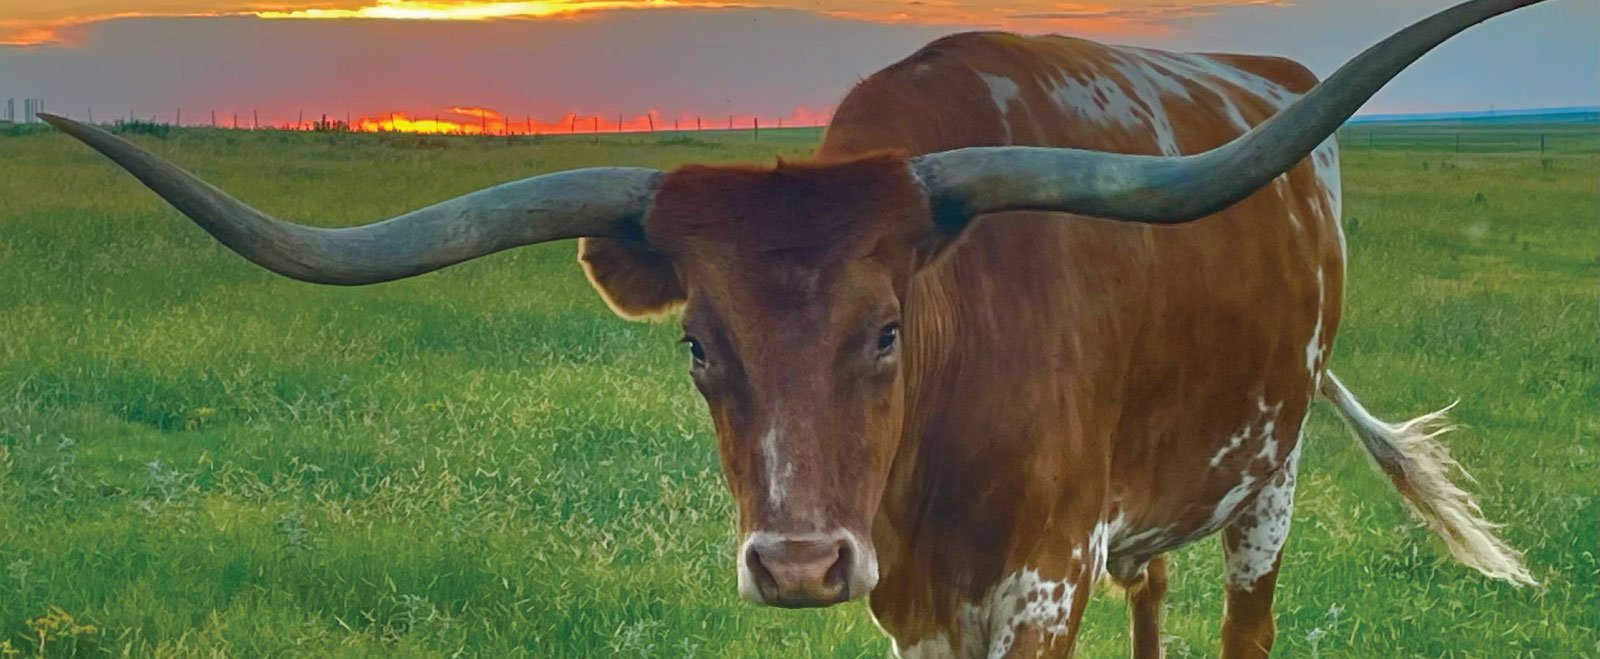 Felix the Longhorn with sunset background